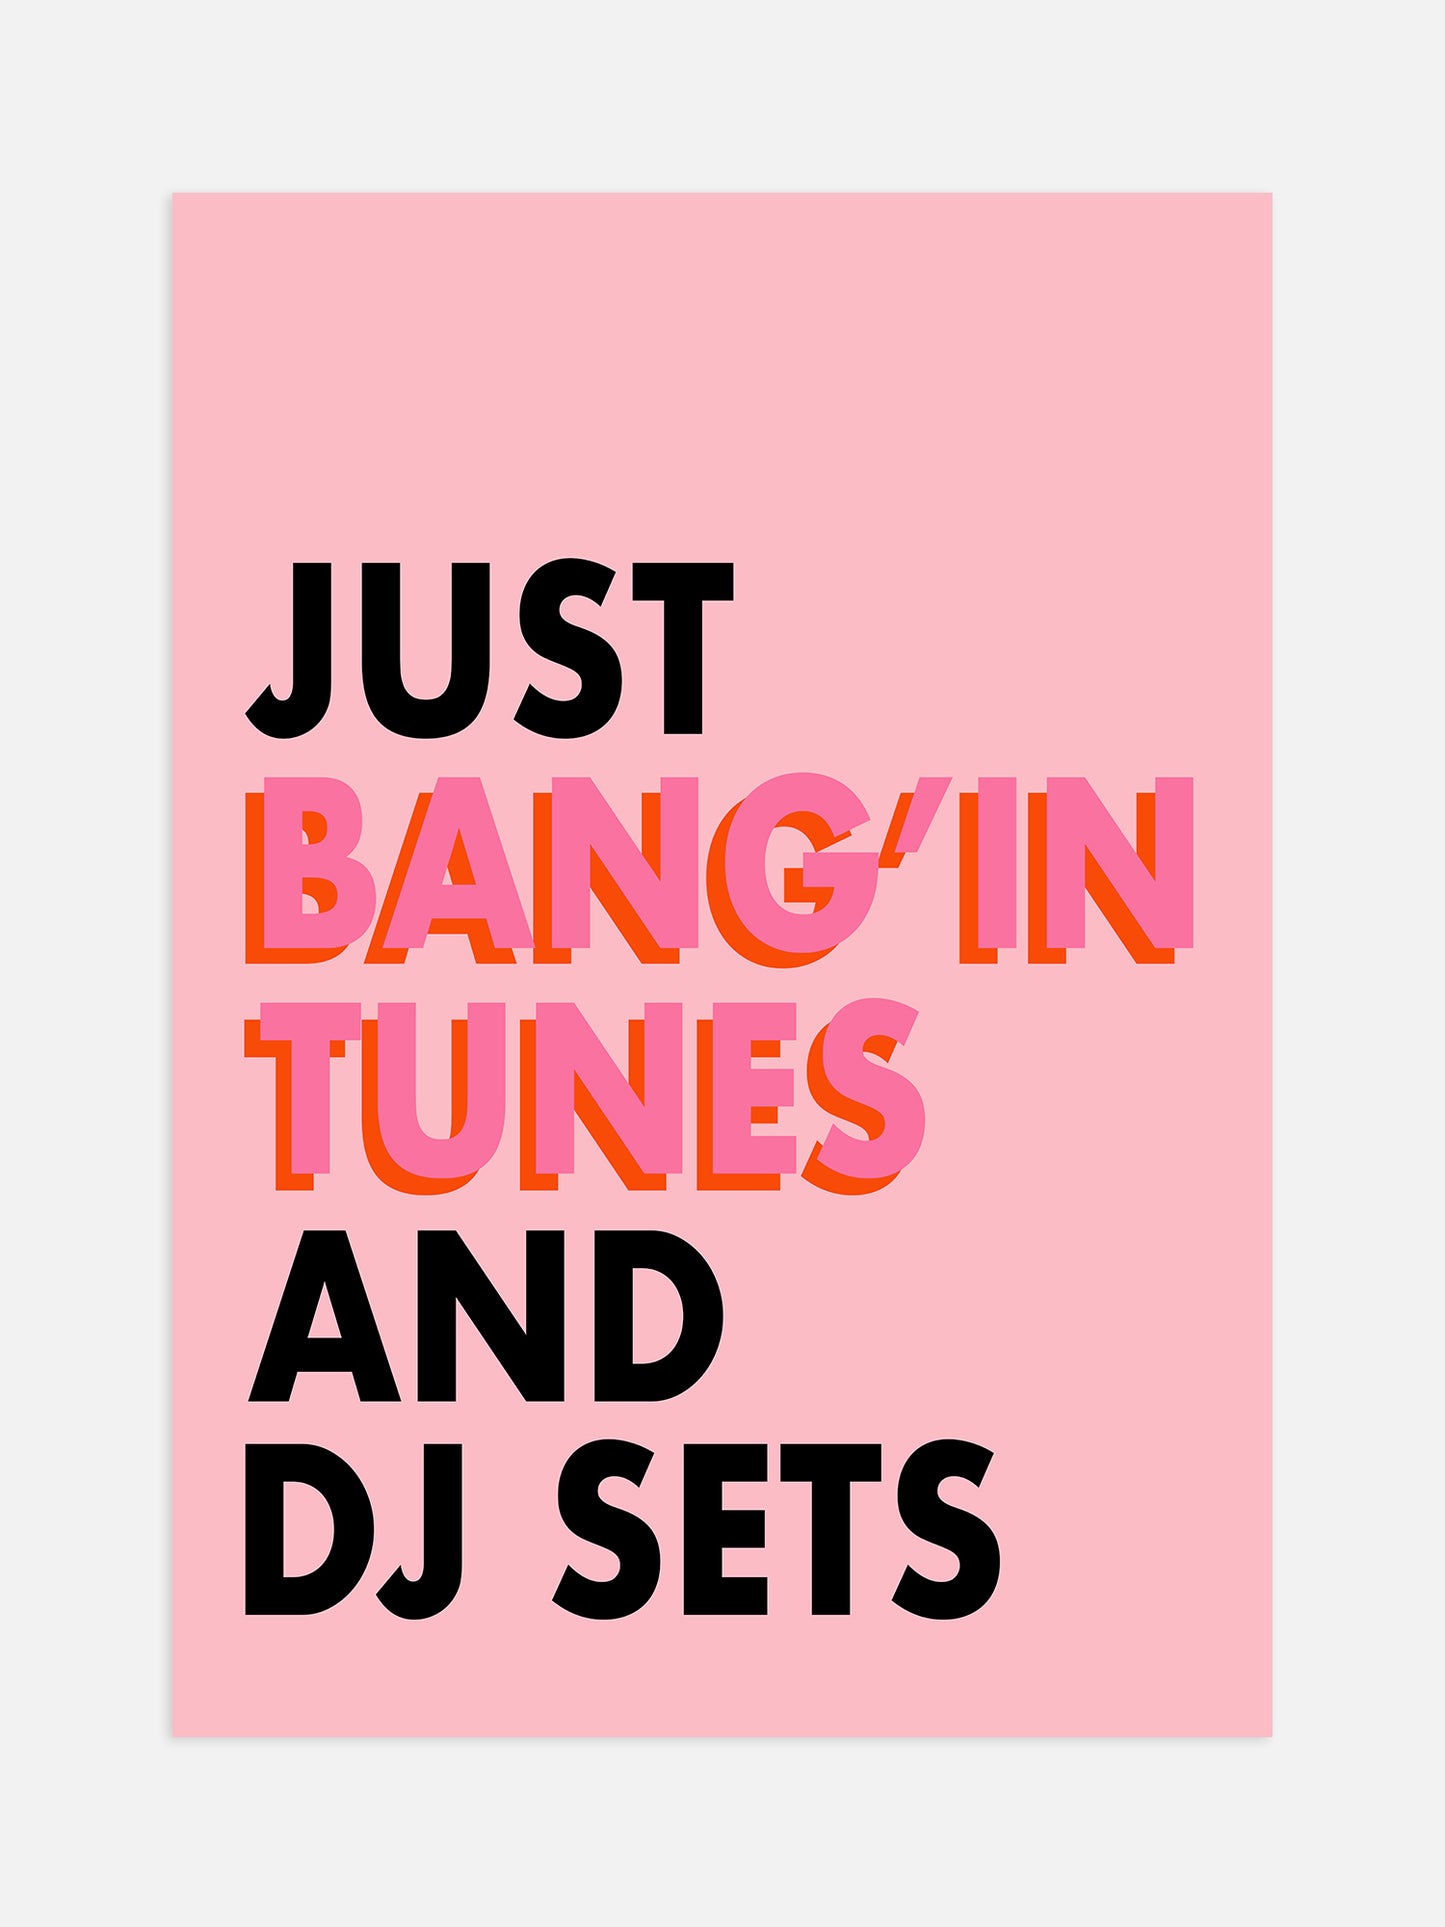 Just Bang'in Tunes And DJ Sets Poster